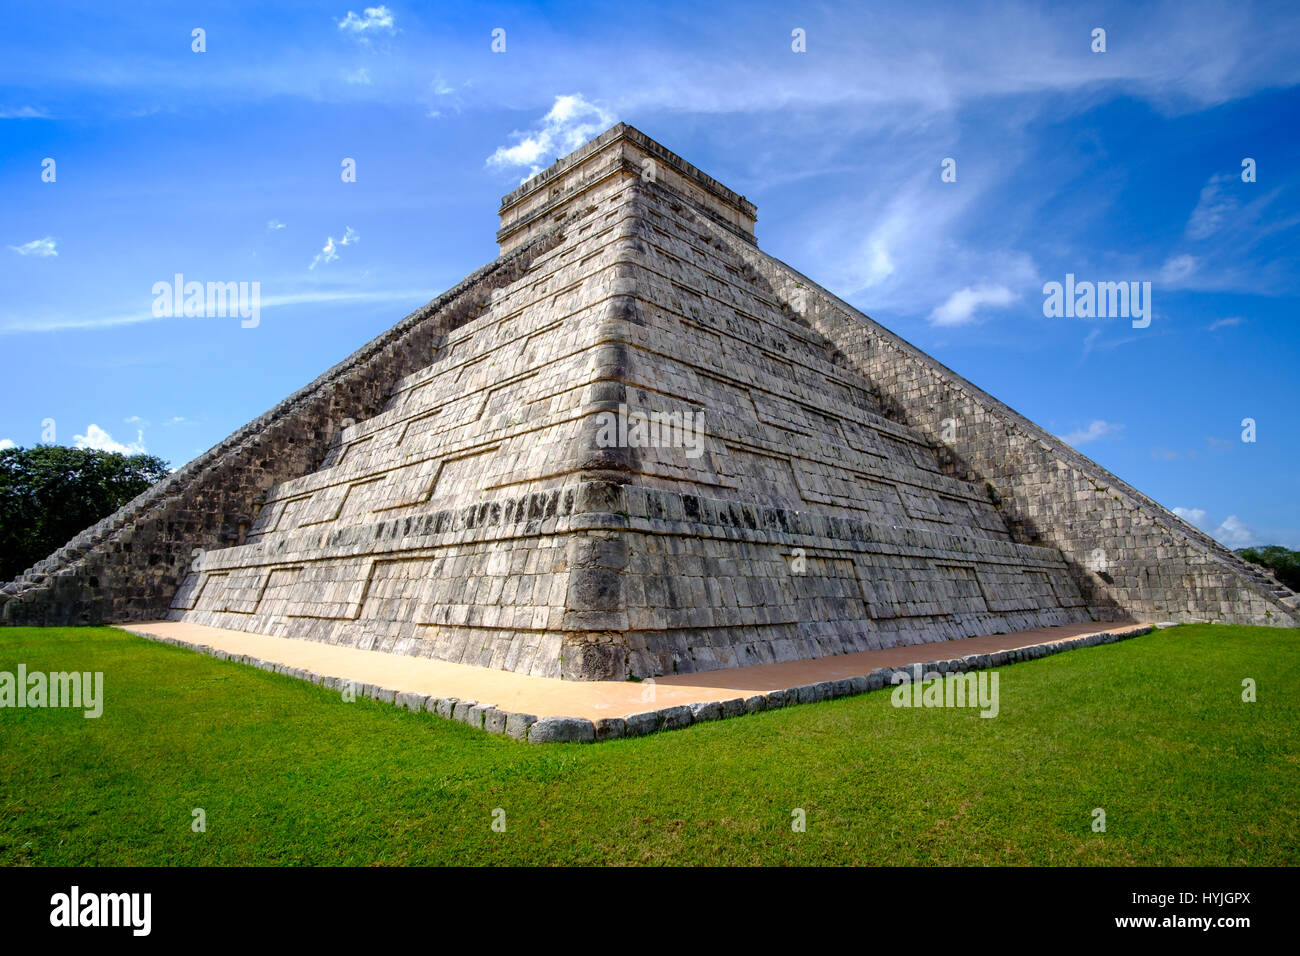 Detail view of famous Mayan pyramid (one of new Seven wonders of the World) in Chichen Itza, Mexico Stock Photo